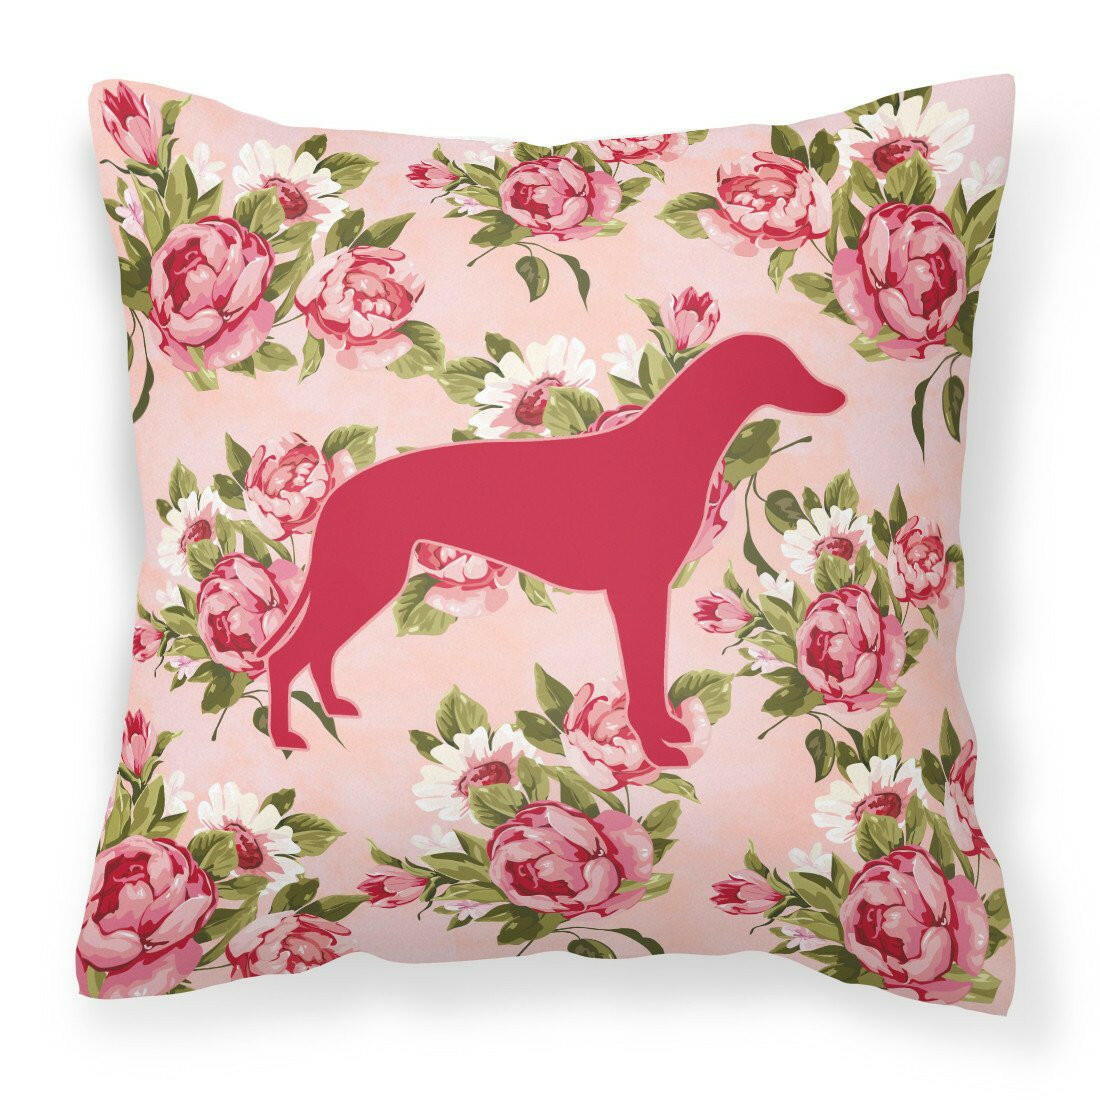 Greyhound Shabby Chic Pink Roses  Fabric Decorative Pillow BB1086-RS-PK-PW1414 - the-store.com